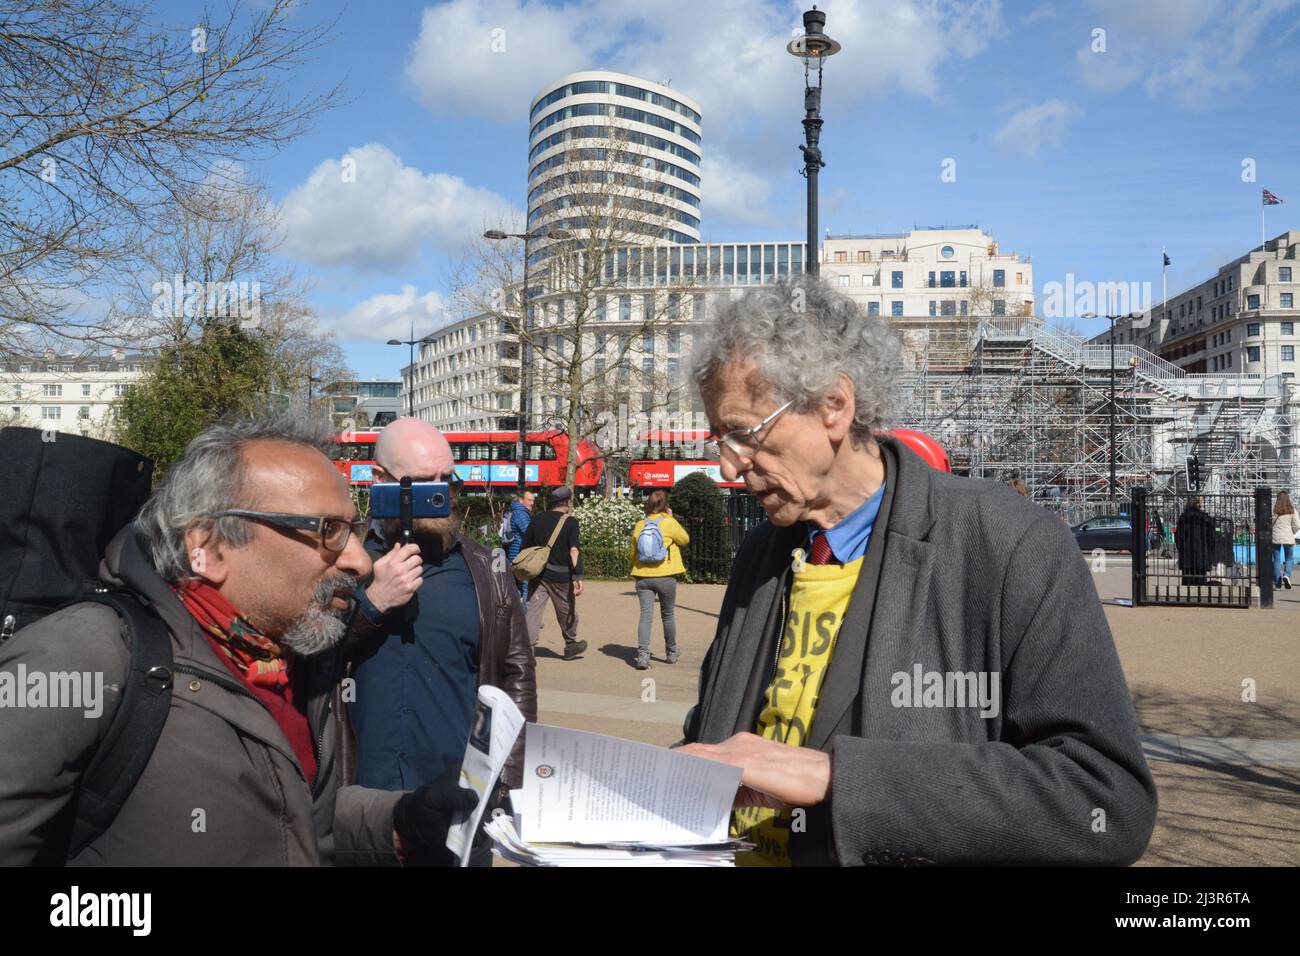 piers corbyn brother of jeremy corbyn , debates man made climate change does not exist. Piers Corbyn is an astrophysicist and Director of WeatherActio Stock Photo